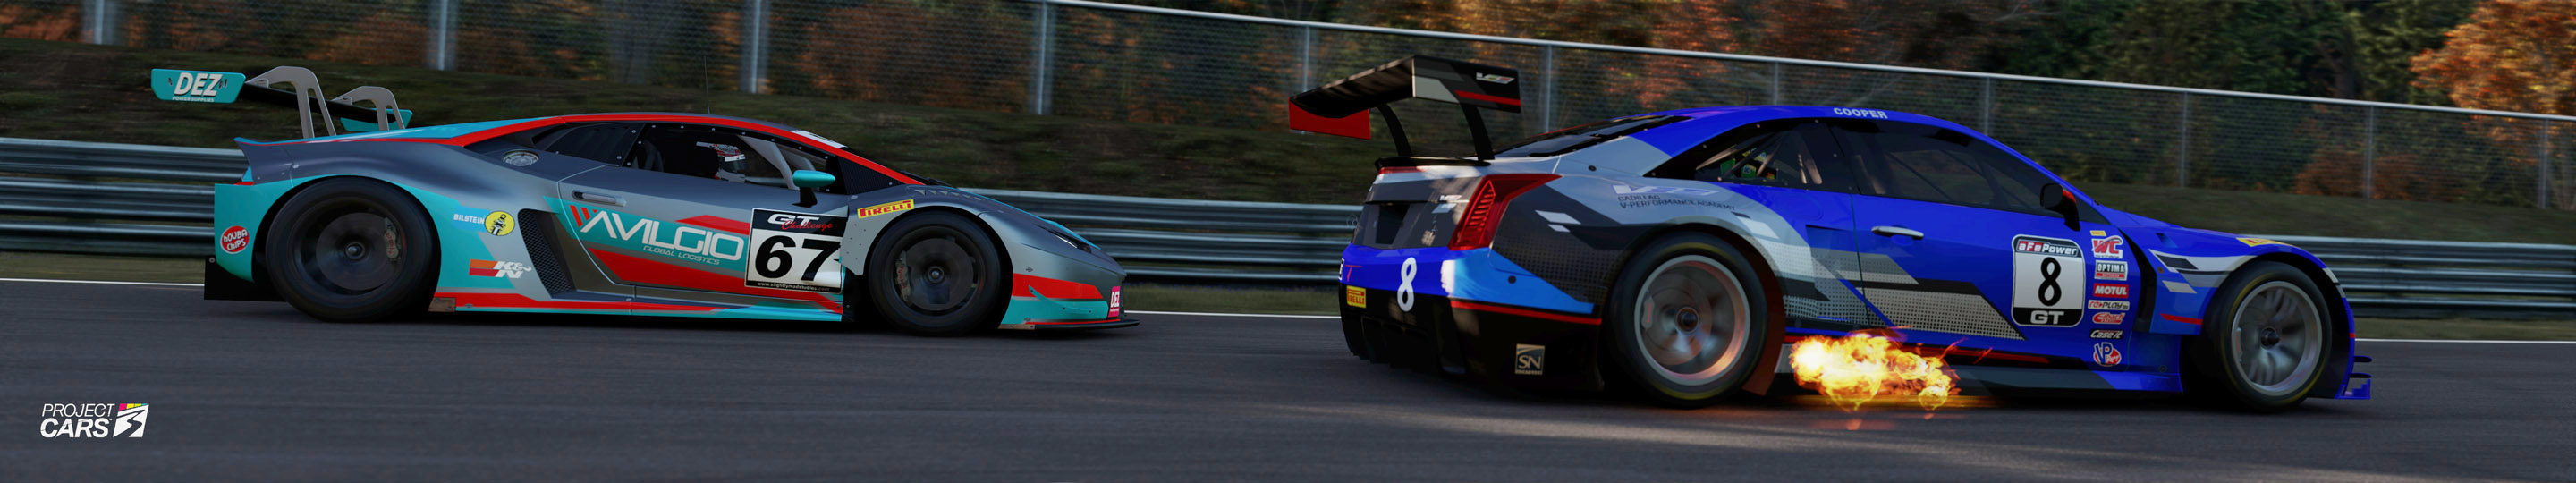 9a PROJECT CARS 3 GT3 at NORDSCHLEIFE copy.jpg